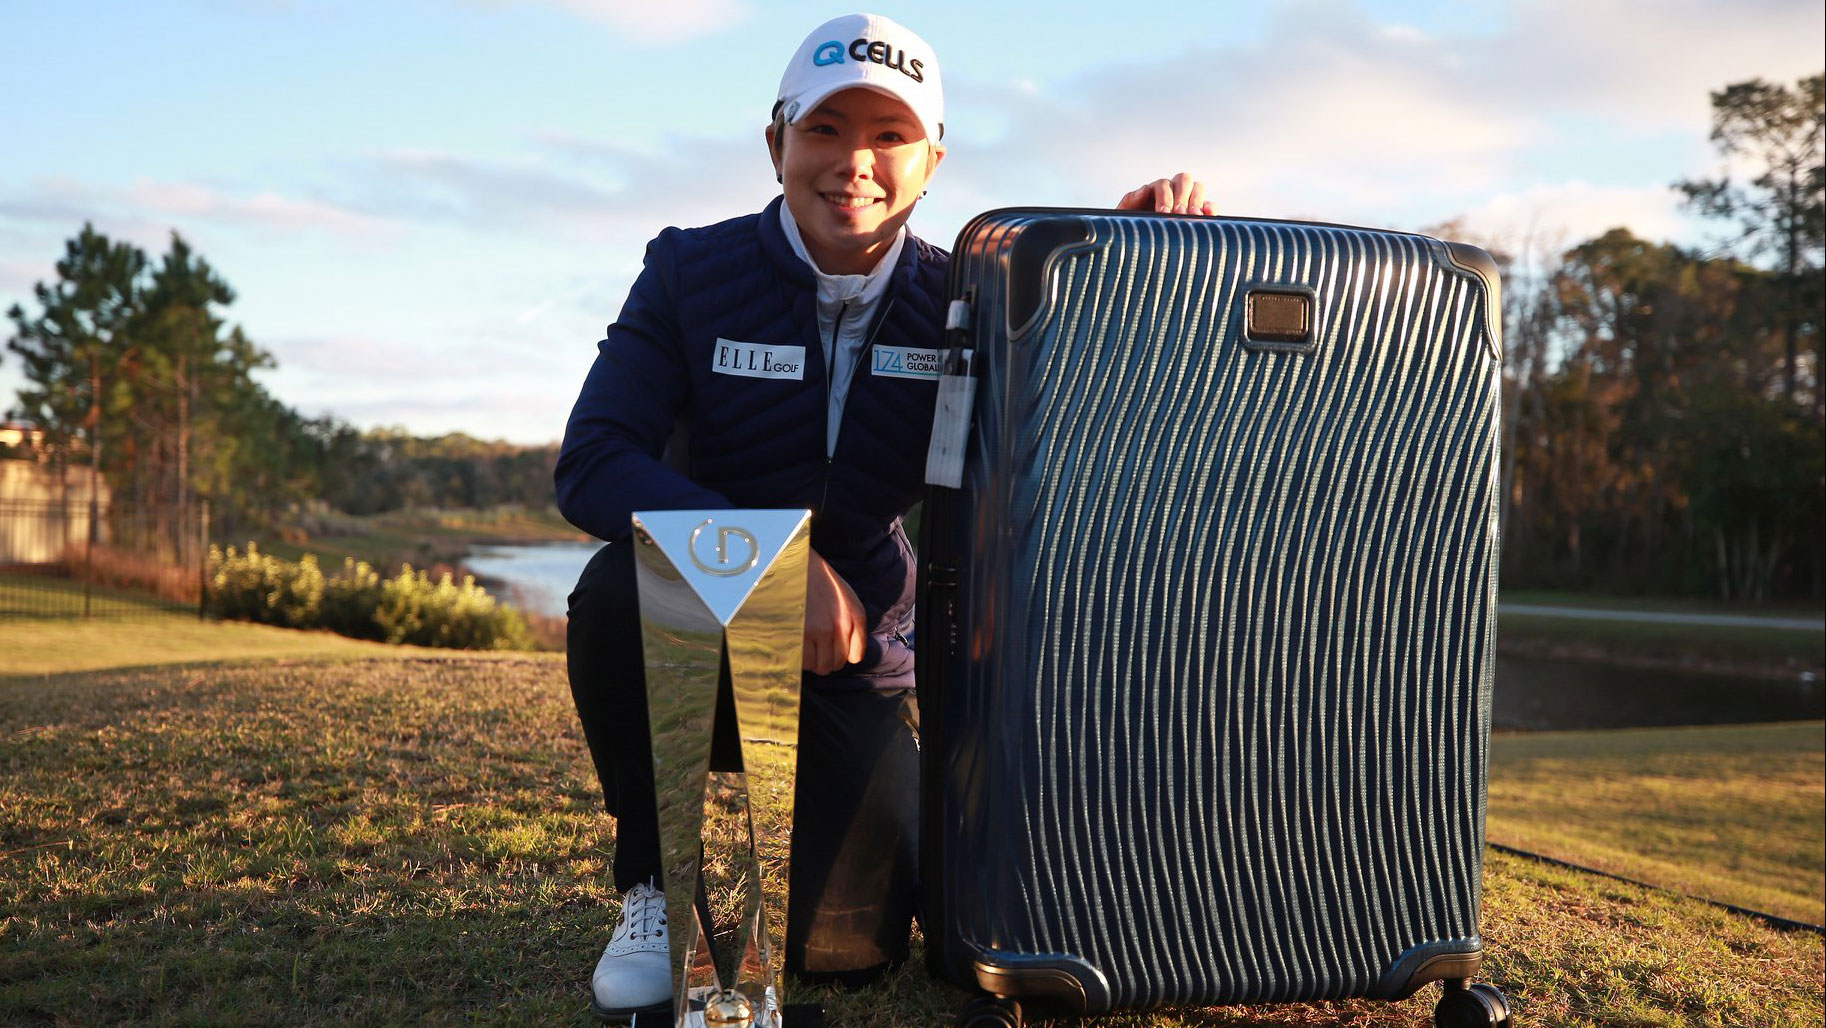 Eun-Hee Ji has her #BagsPacked for the 2020 Diamond Resorts Tournament of Champions after her victory at the 2019 Diamond Resorts Tournament of Champions